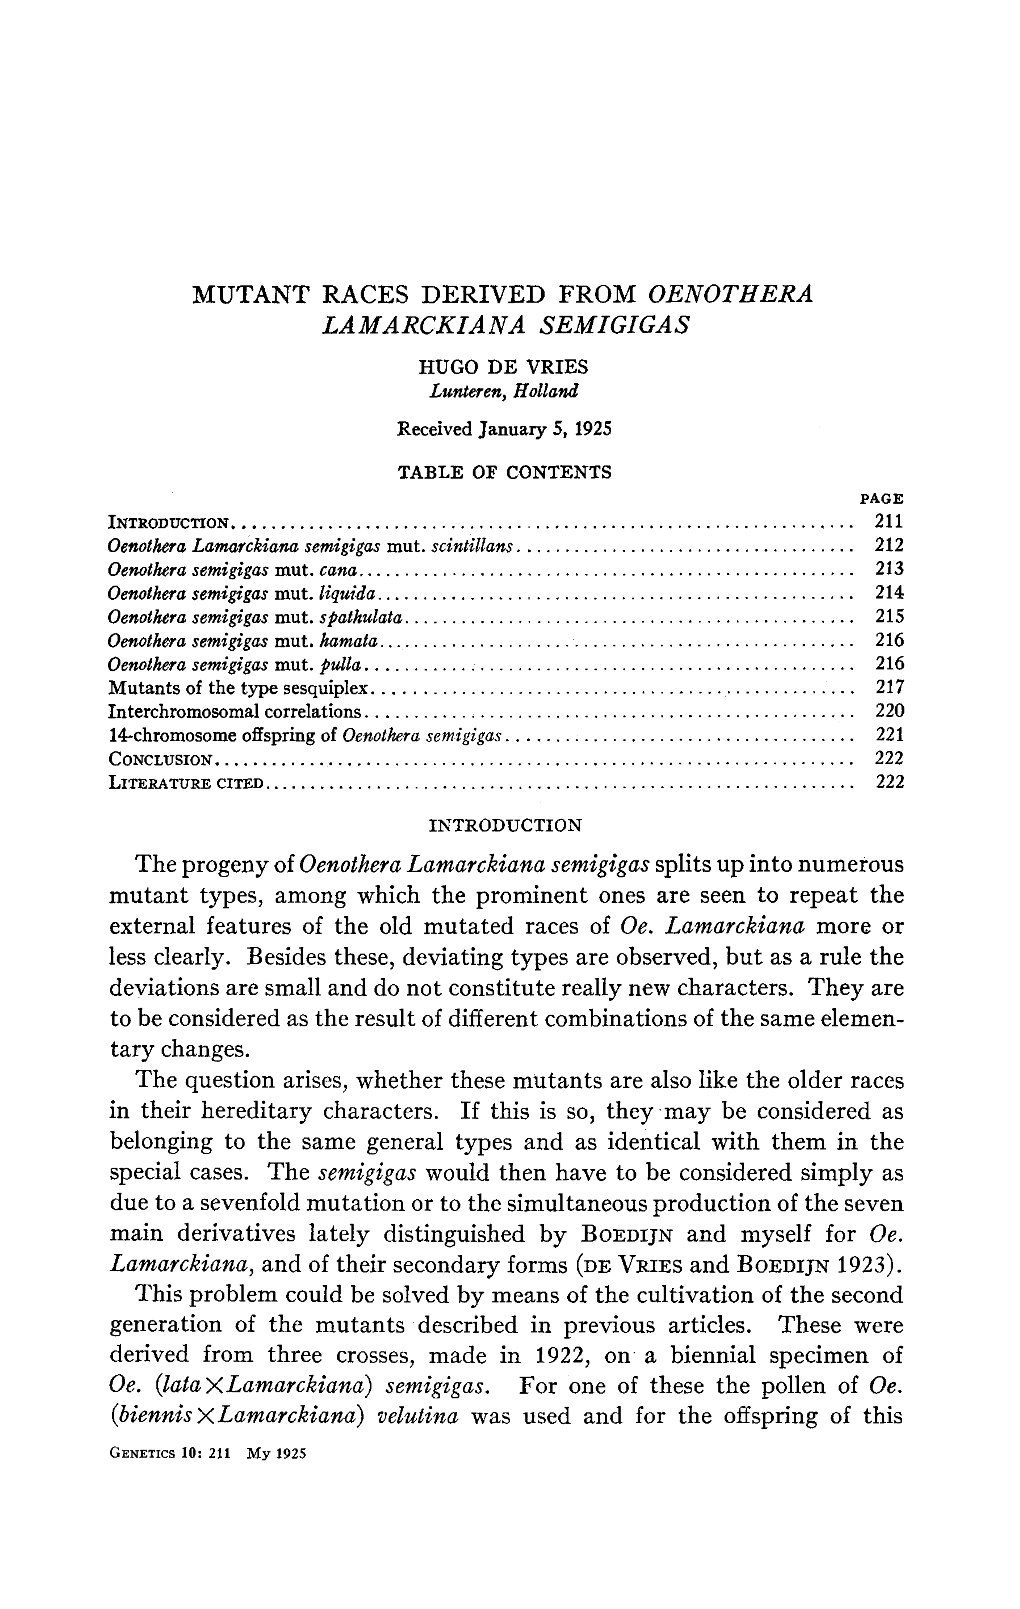 MUTANT RACES DERIVED from OENOTHERA LAMARCKIANA SEMIGIGAS HUGO DE VRIES Lunteren, Holland Received January 5, 1925 TABLE of CONTENTS PAGE INTRODUC~ON